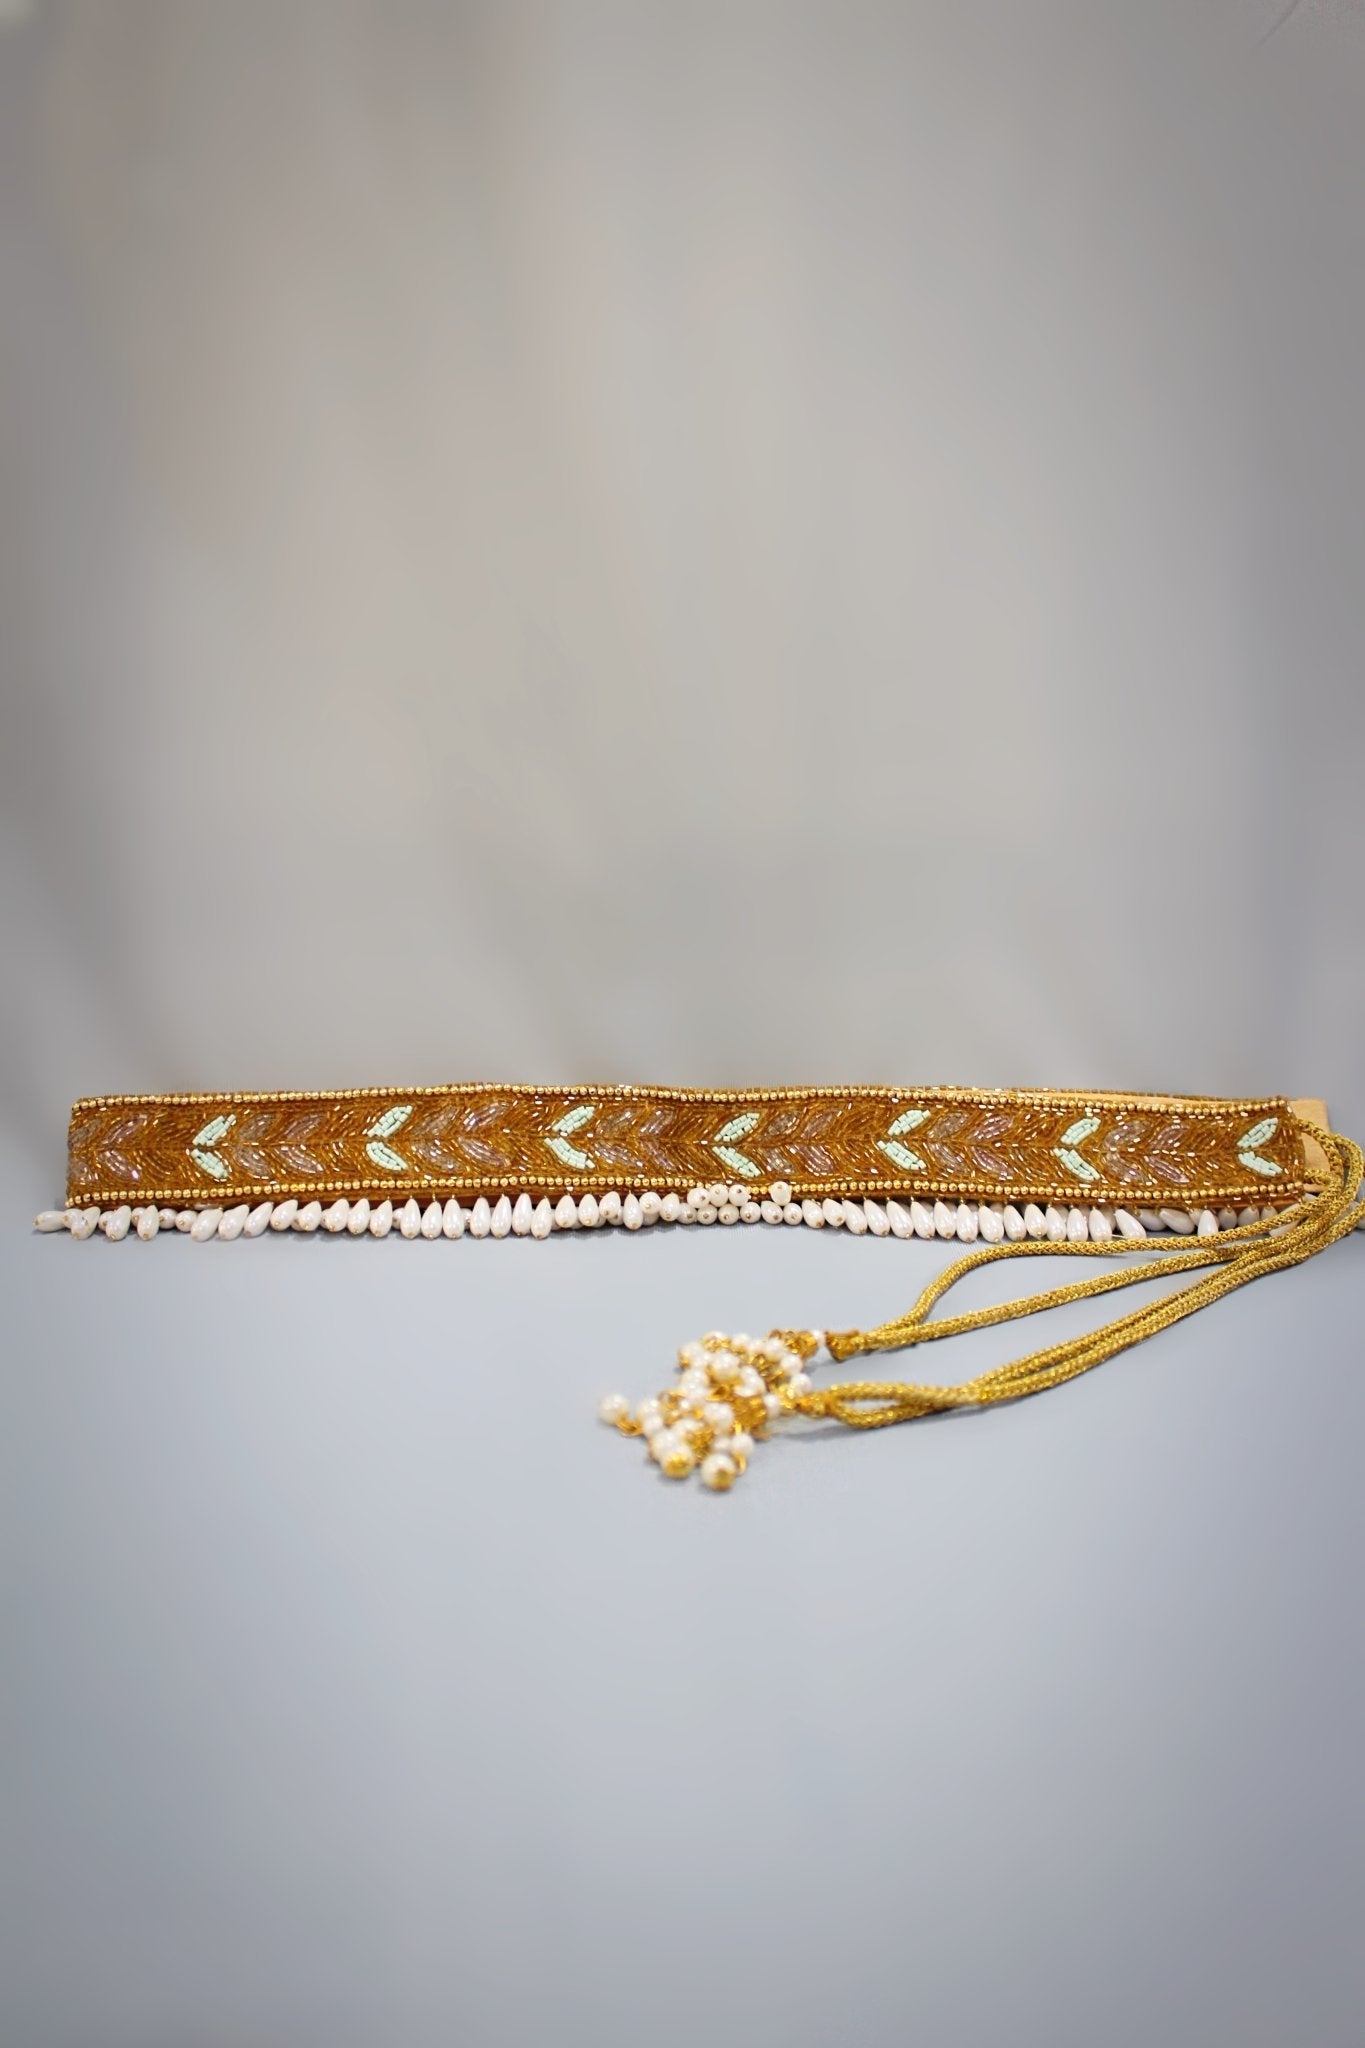 Buy Traditional embroidery cloth Saree Waist Belt stretchable kamarband for  Women at Amazon.in